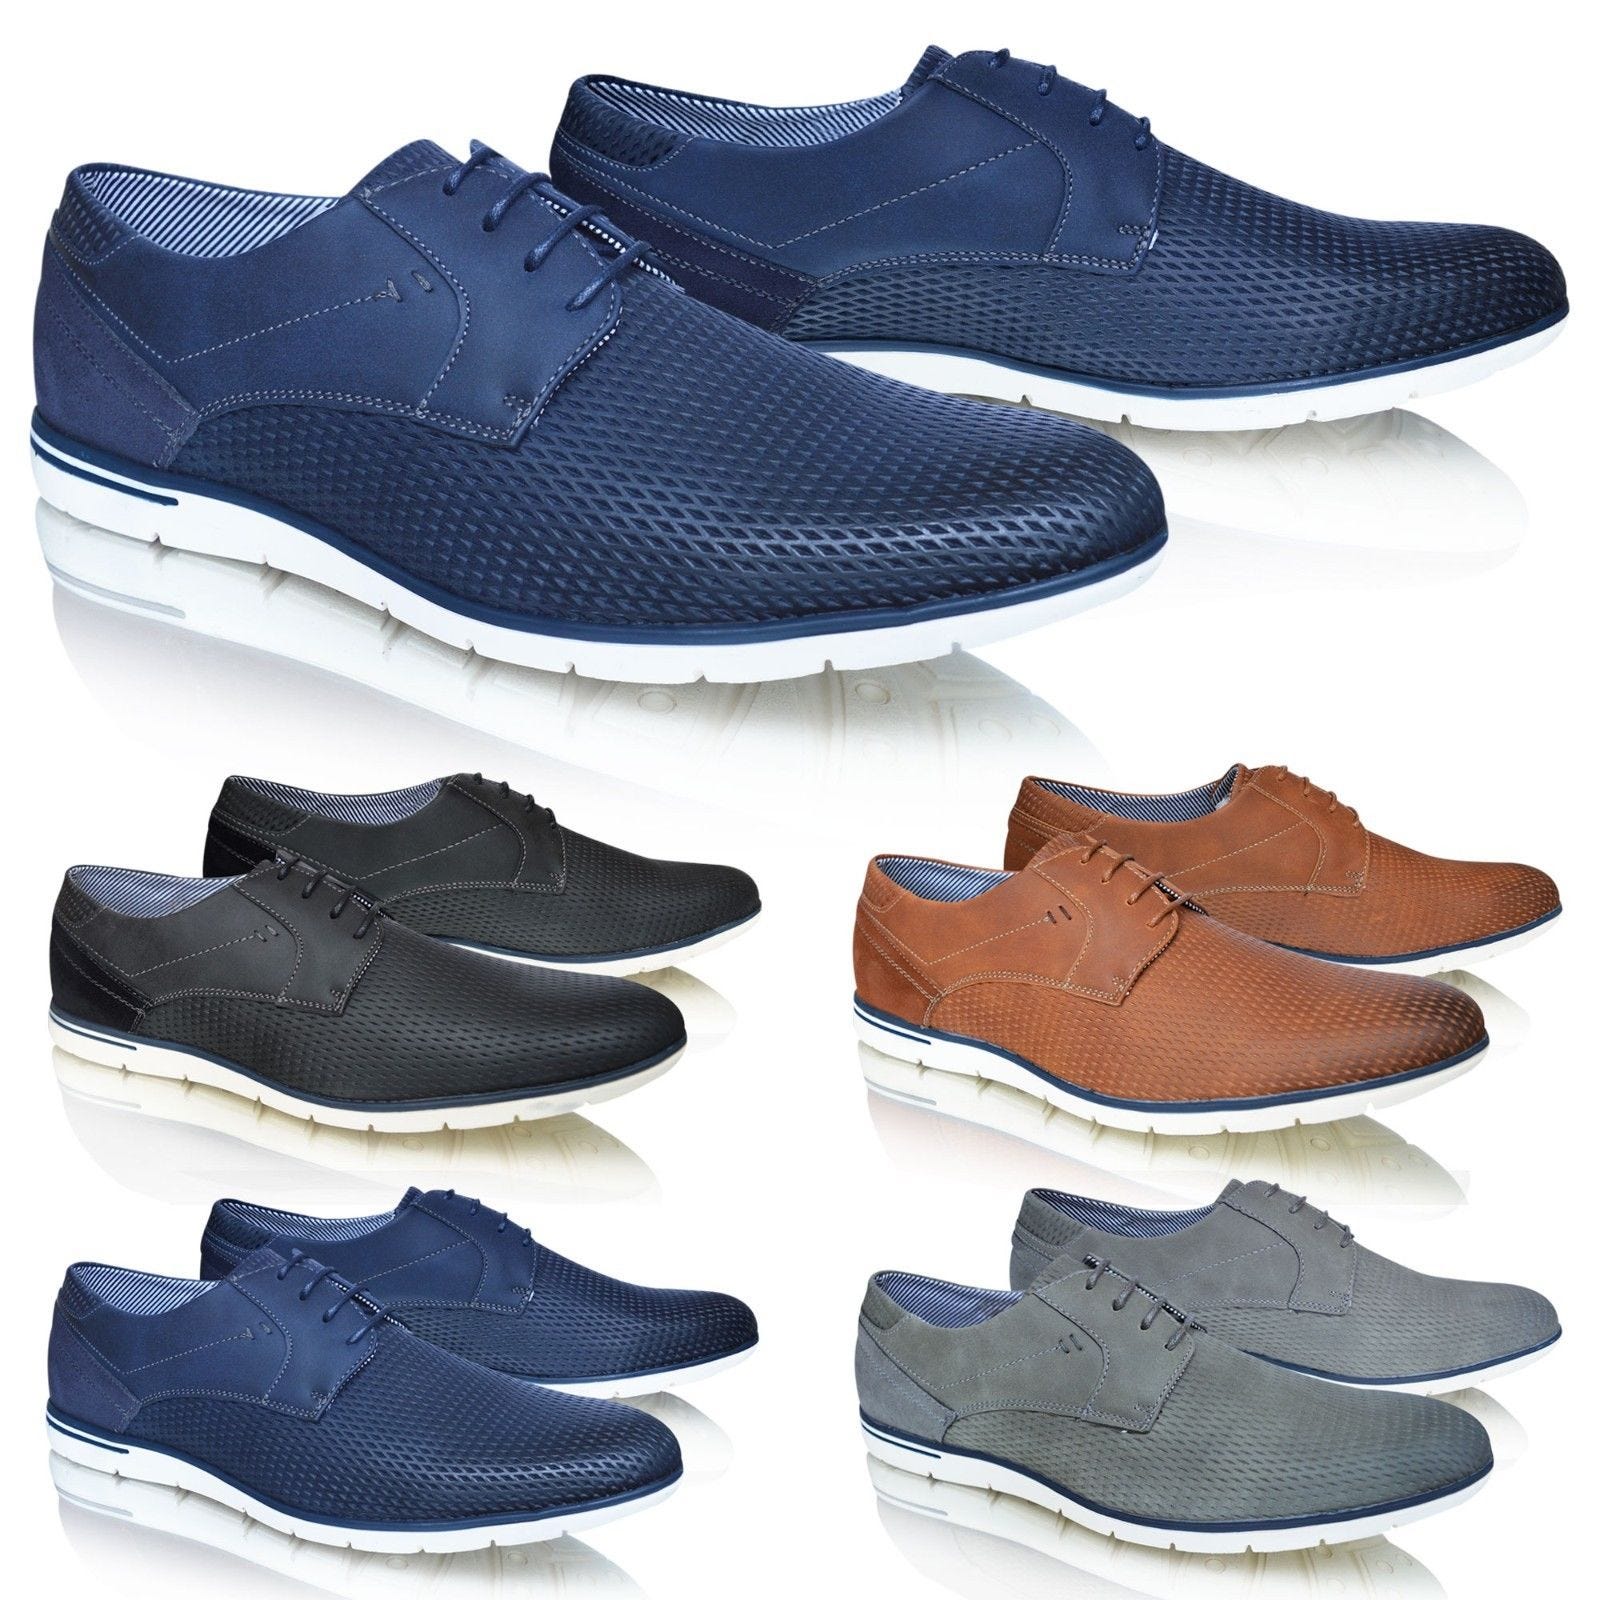 shoes for formal and casual wear